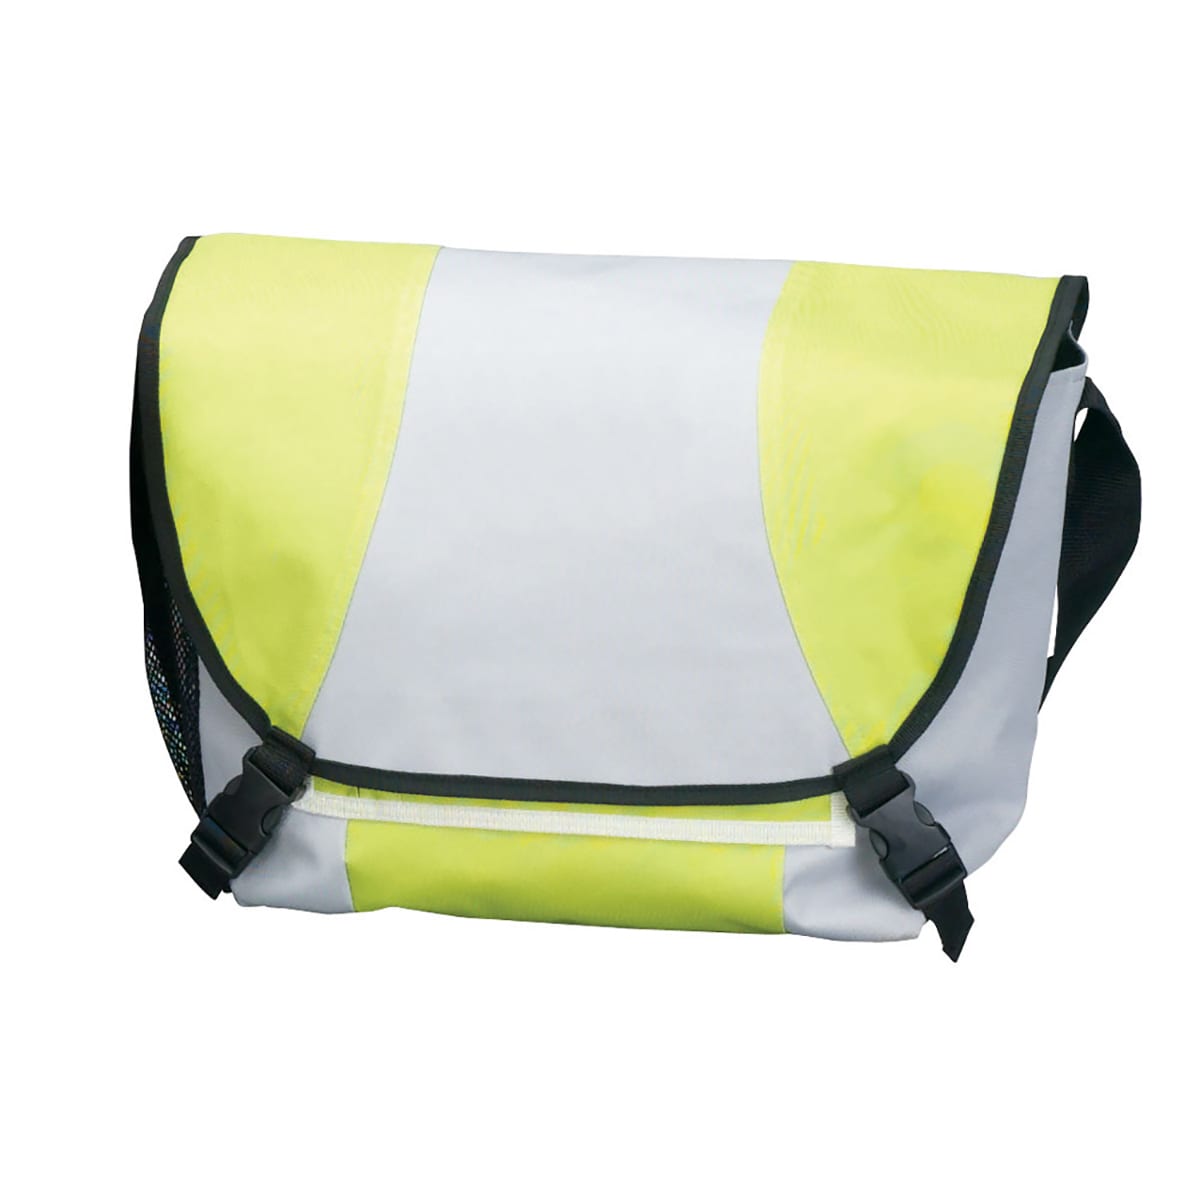 Goodhope Light Weight School Travel Flap Over Unisex Accessories Messenger Bag Green - image 1 of 4